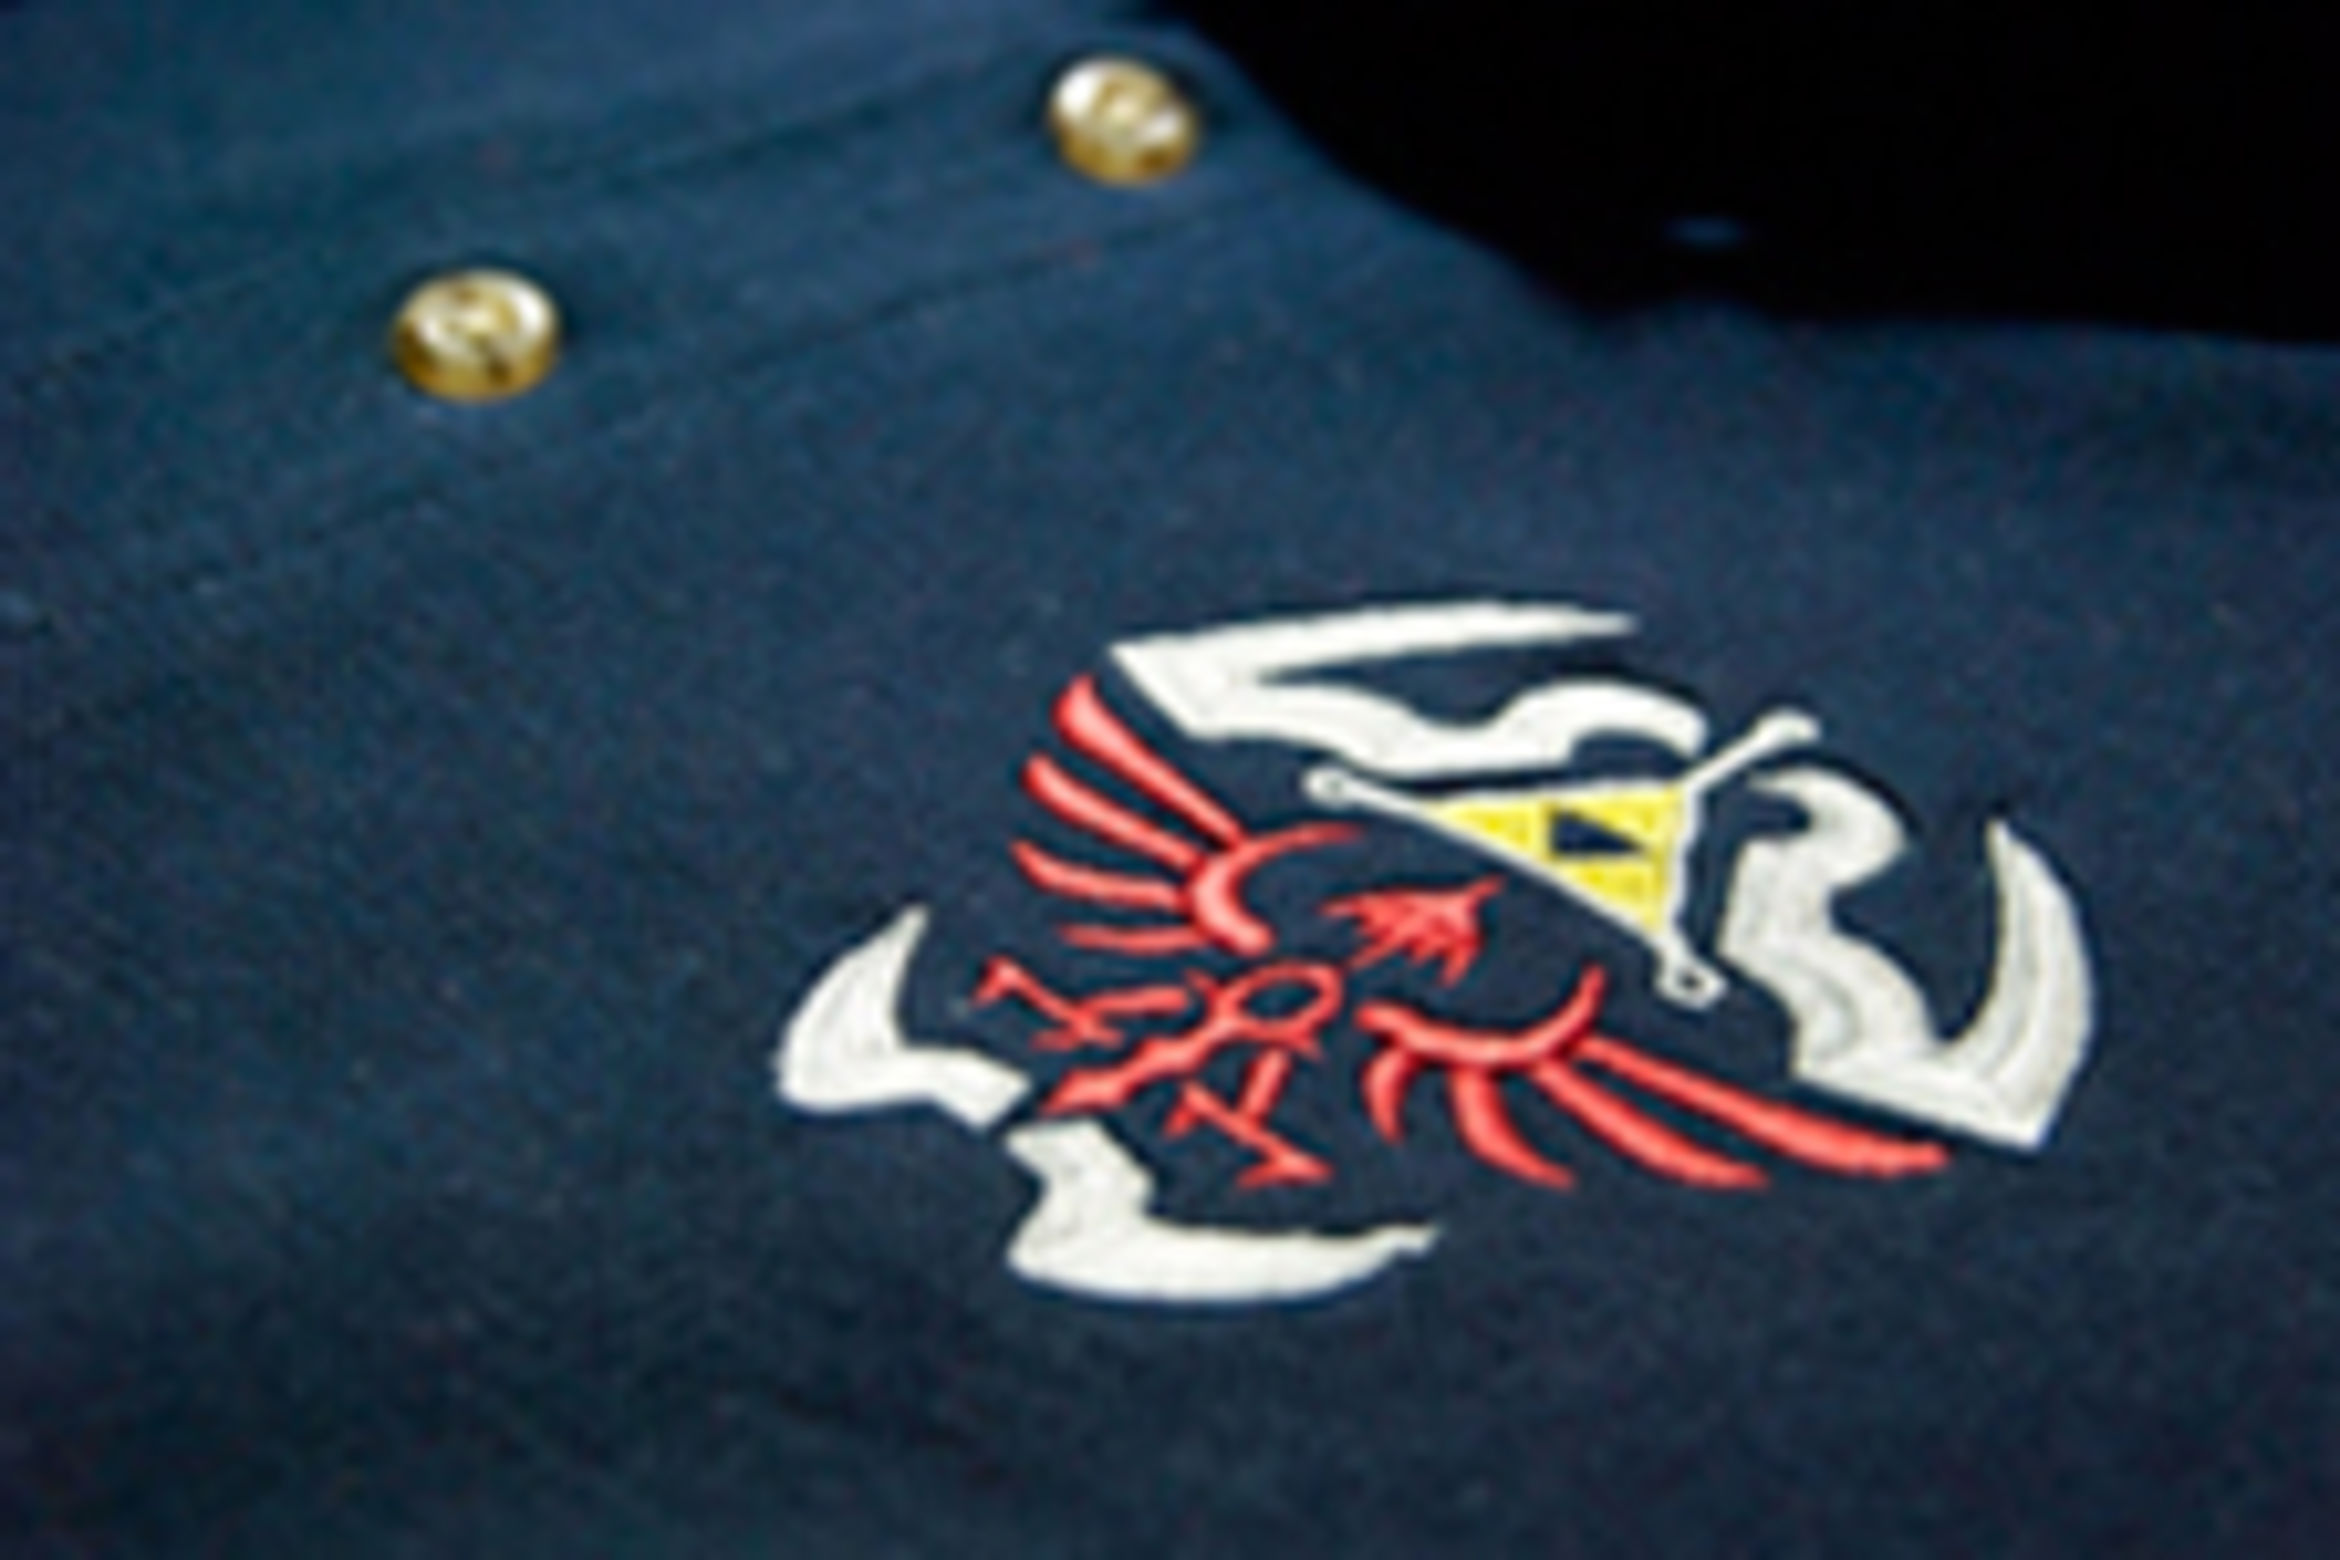 Polo shirts are the most popular garments we embroider